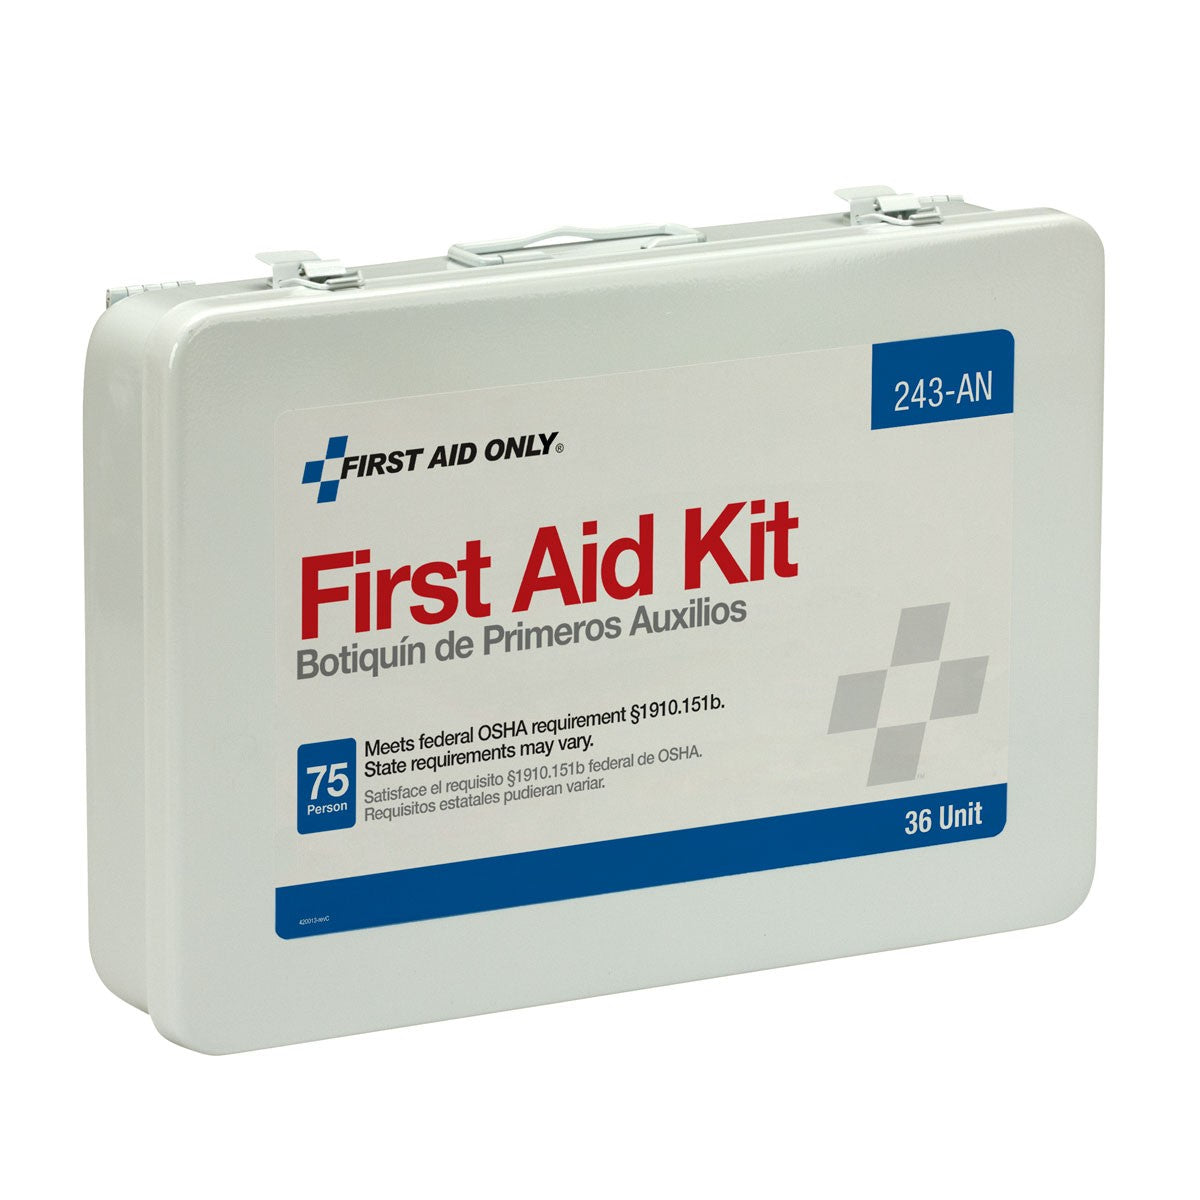 75 Person Unitized Metal First Aid Kit, OSHA Compliant - W-243-AN